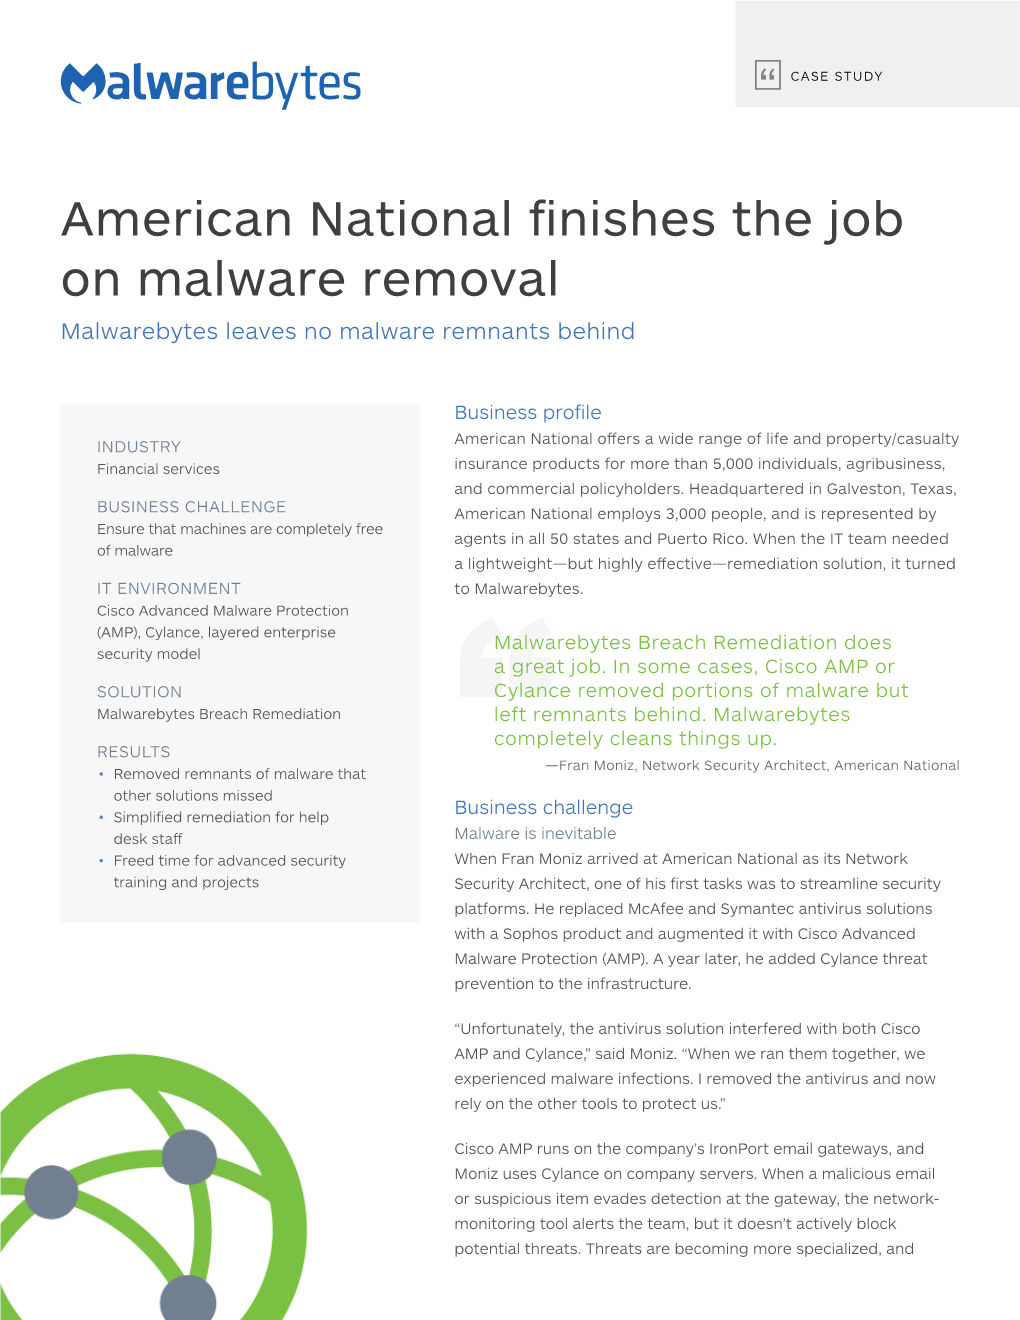 American National Finishes the Job on Malware Removal Malwarebytes Leaves No Malware Remnants Behind